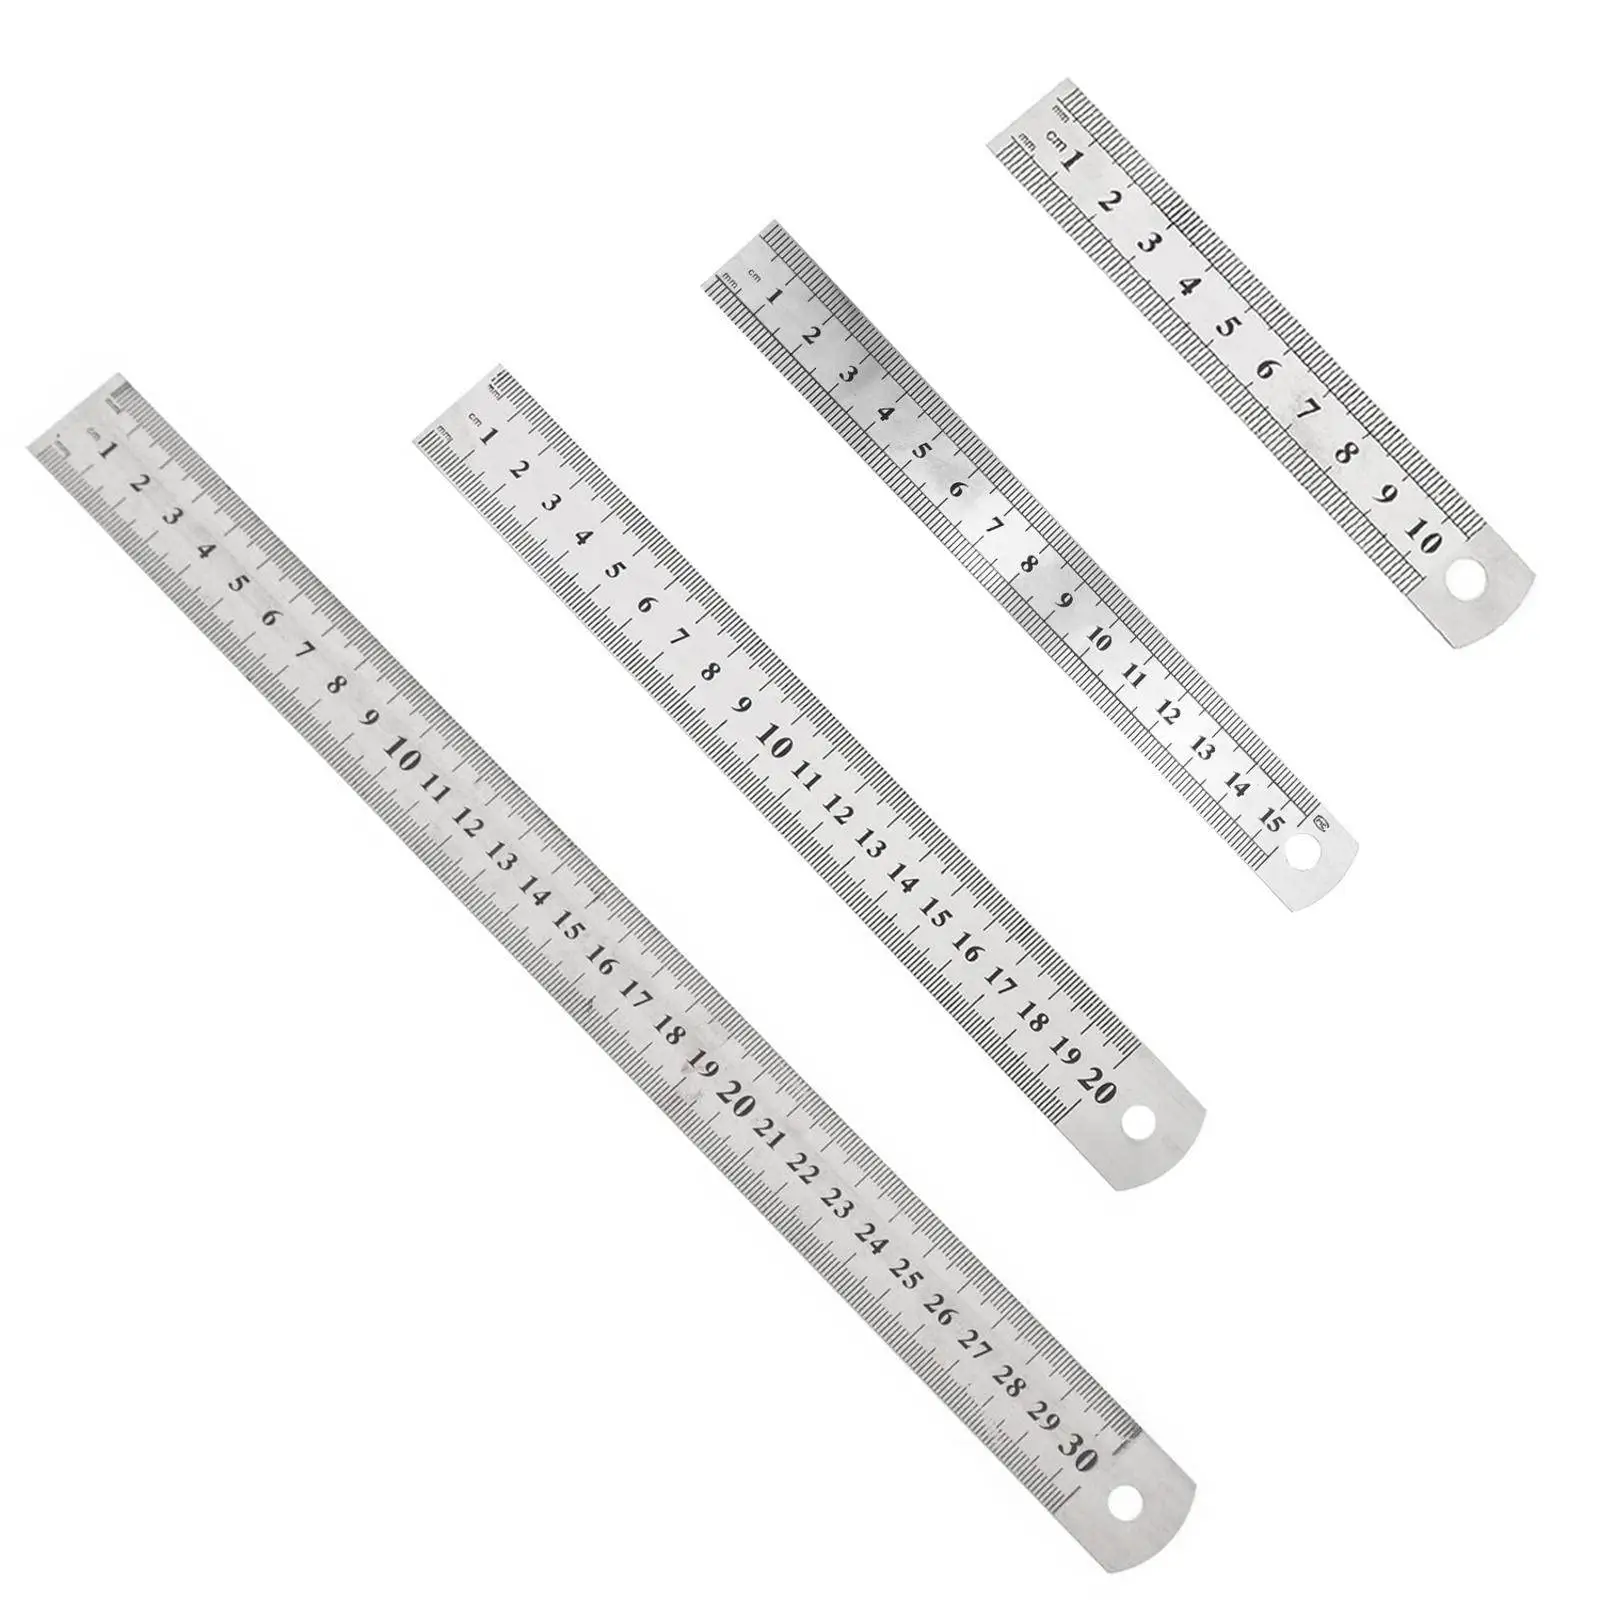 4 Diffent Size Metal Rulers Suitable for Student School and Office Drawing Measuring Tools Inch Centimeter Scale